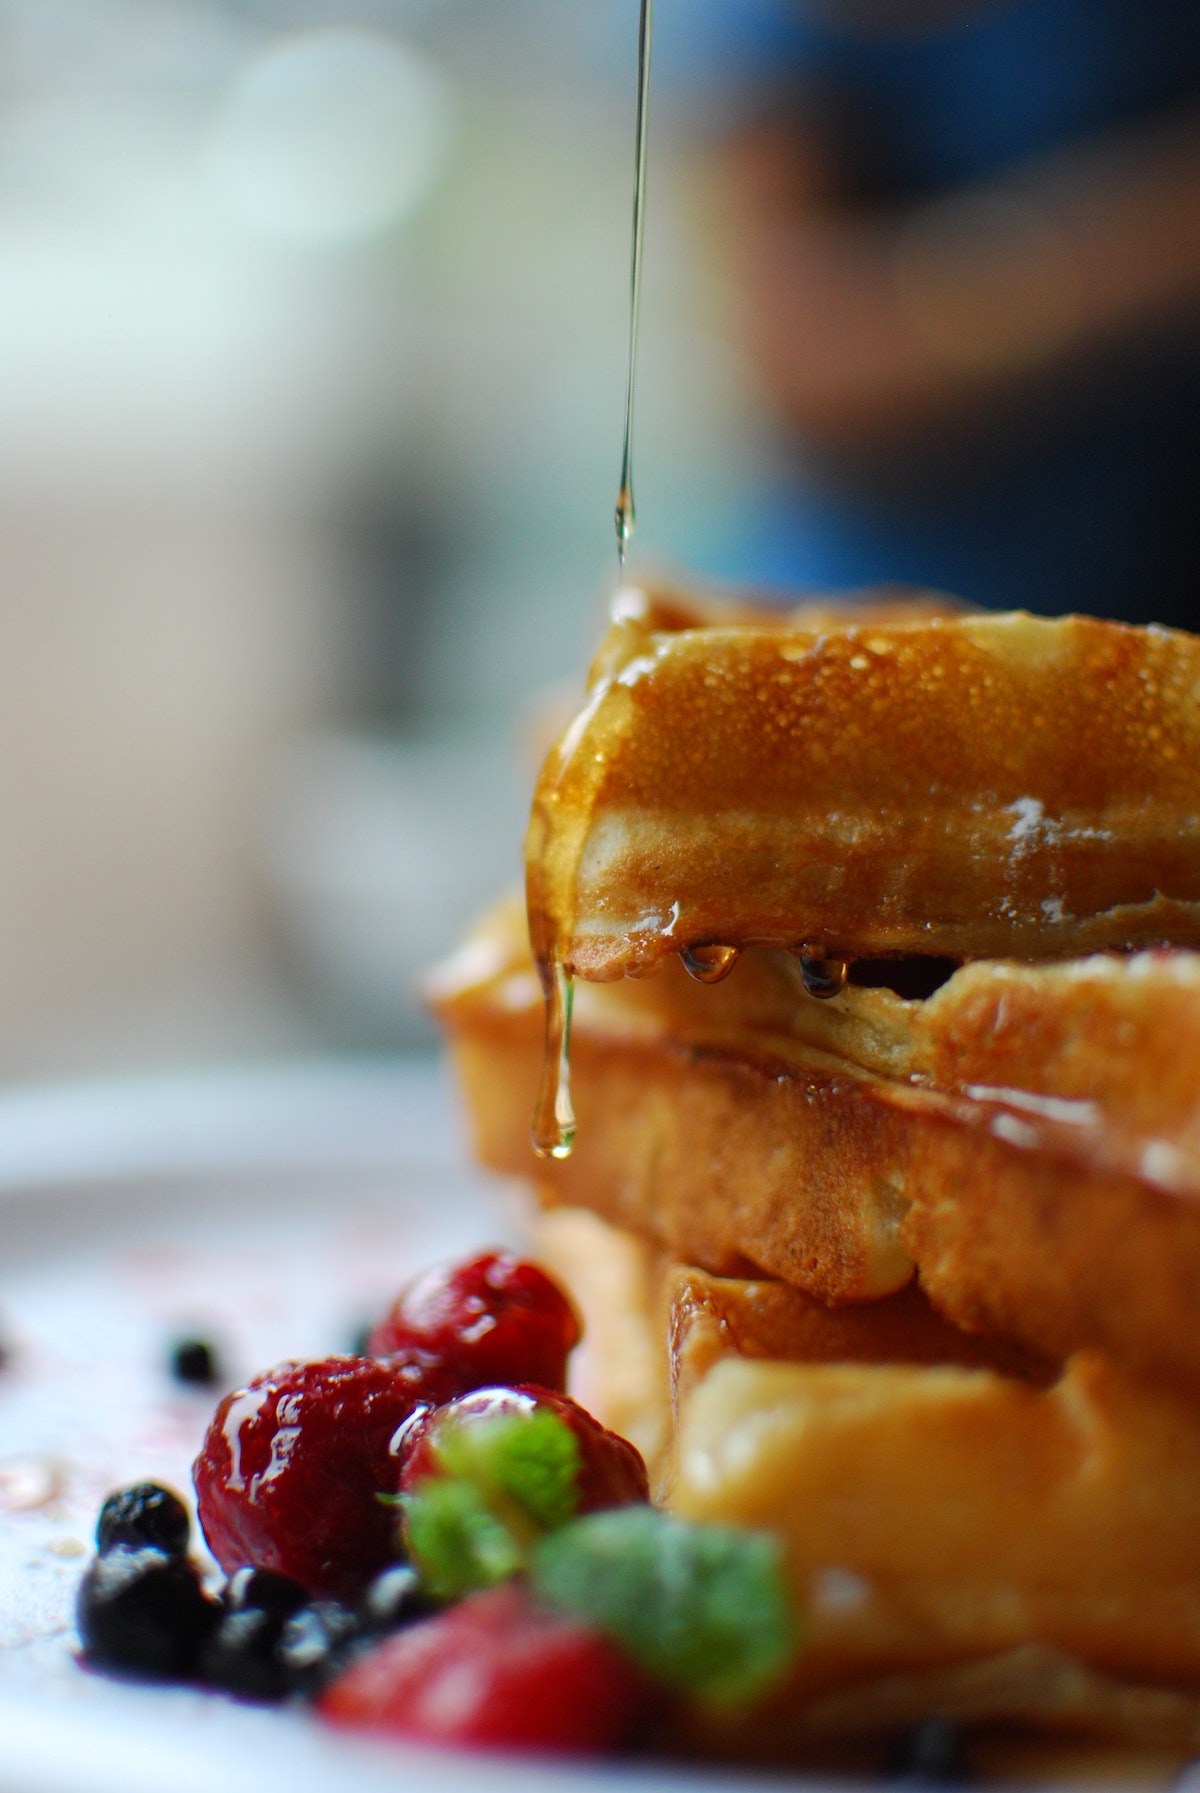 extreme close up of syrup being drizzled over a stack of three waffles with berries on the side